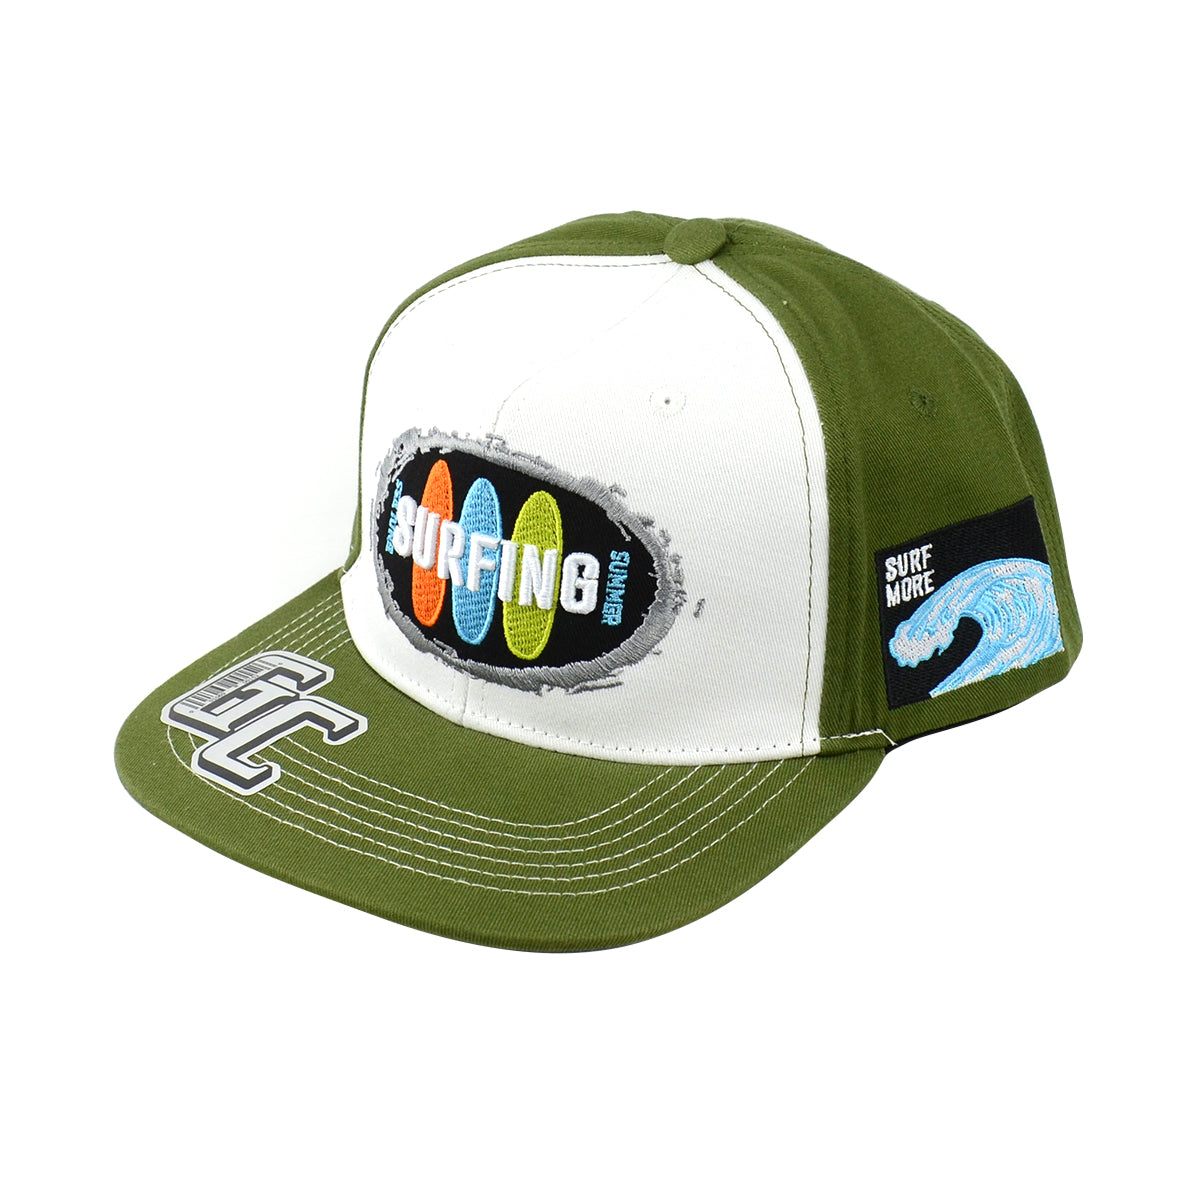 Snapback "Surfing" Hat Embroidered